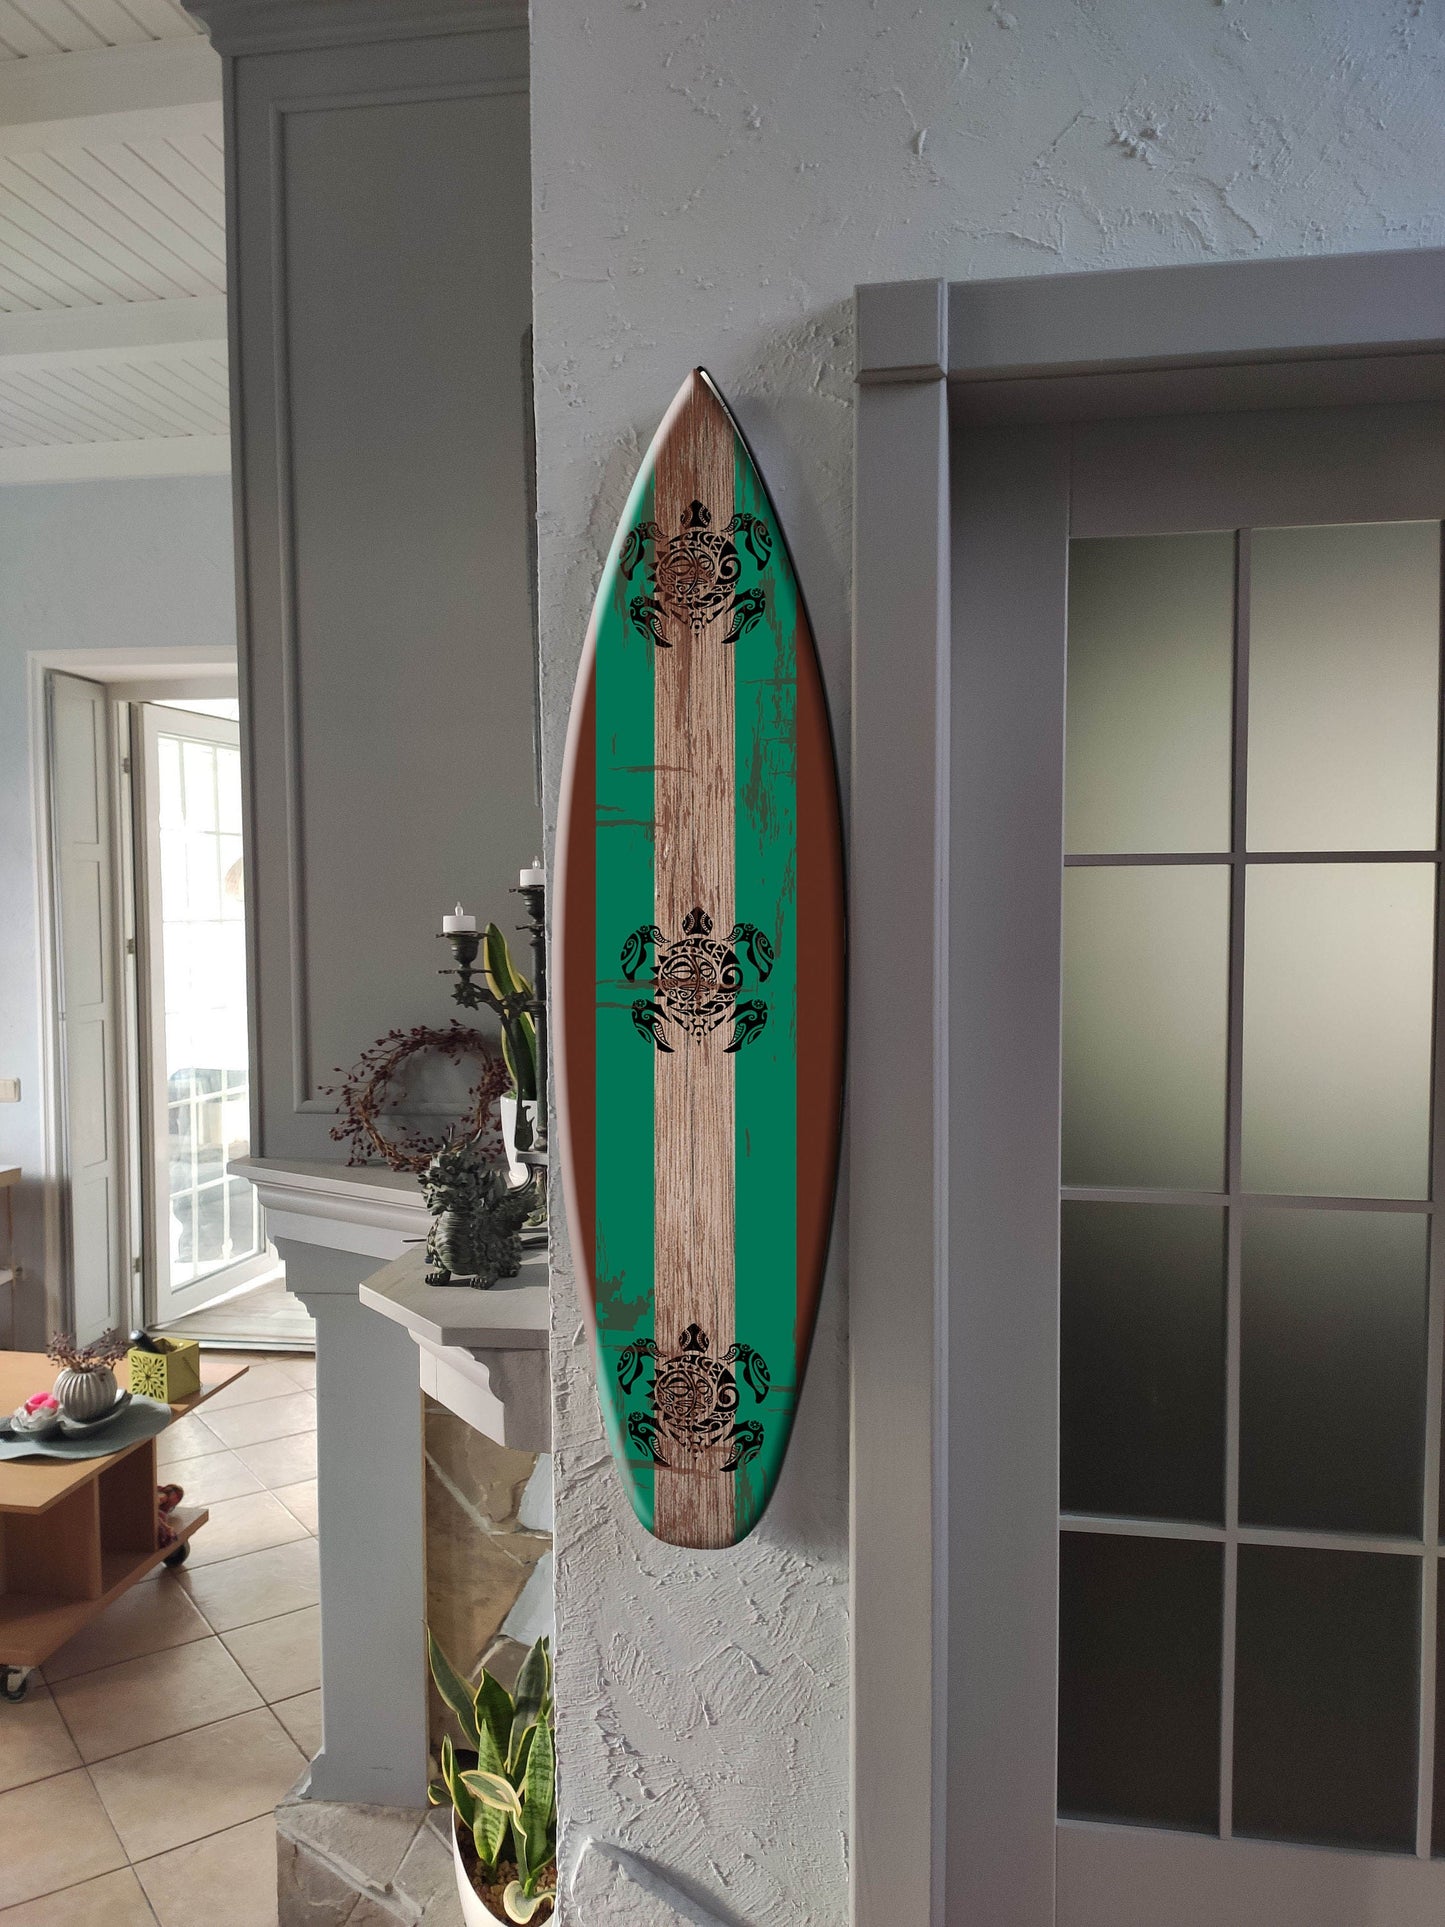 Interior Surfboard for Wall with Turtles Print: Driftwood Effect Wall Sign in Turquoise Decor